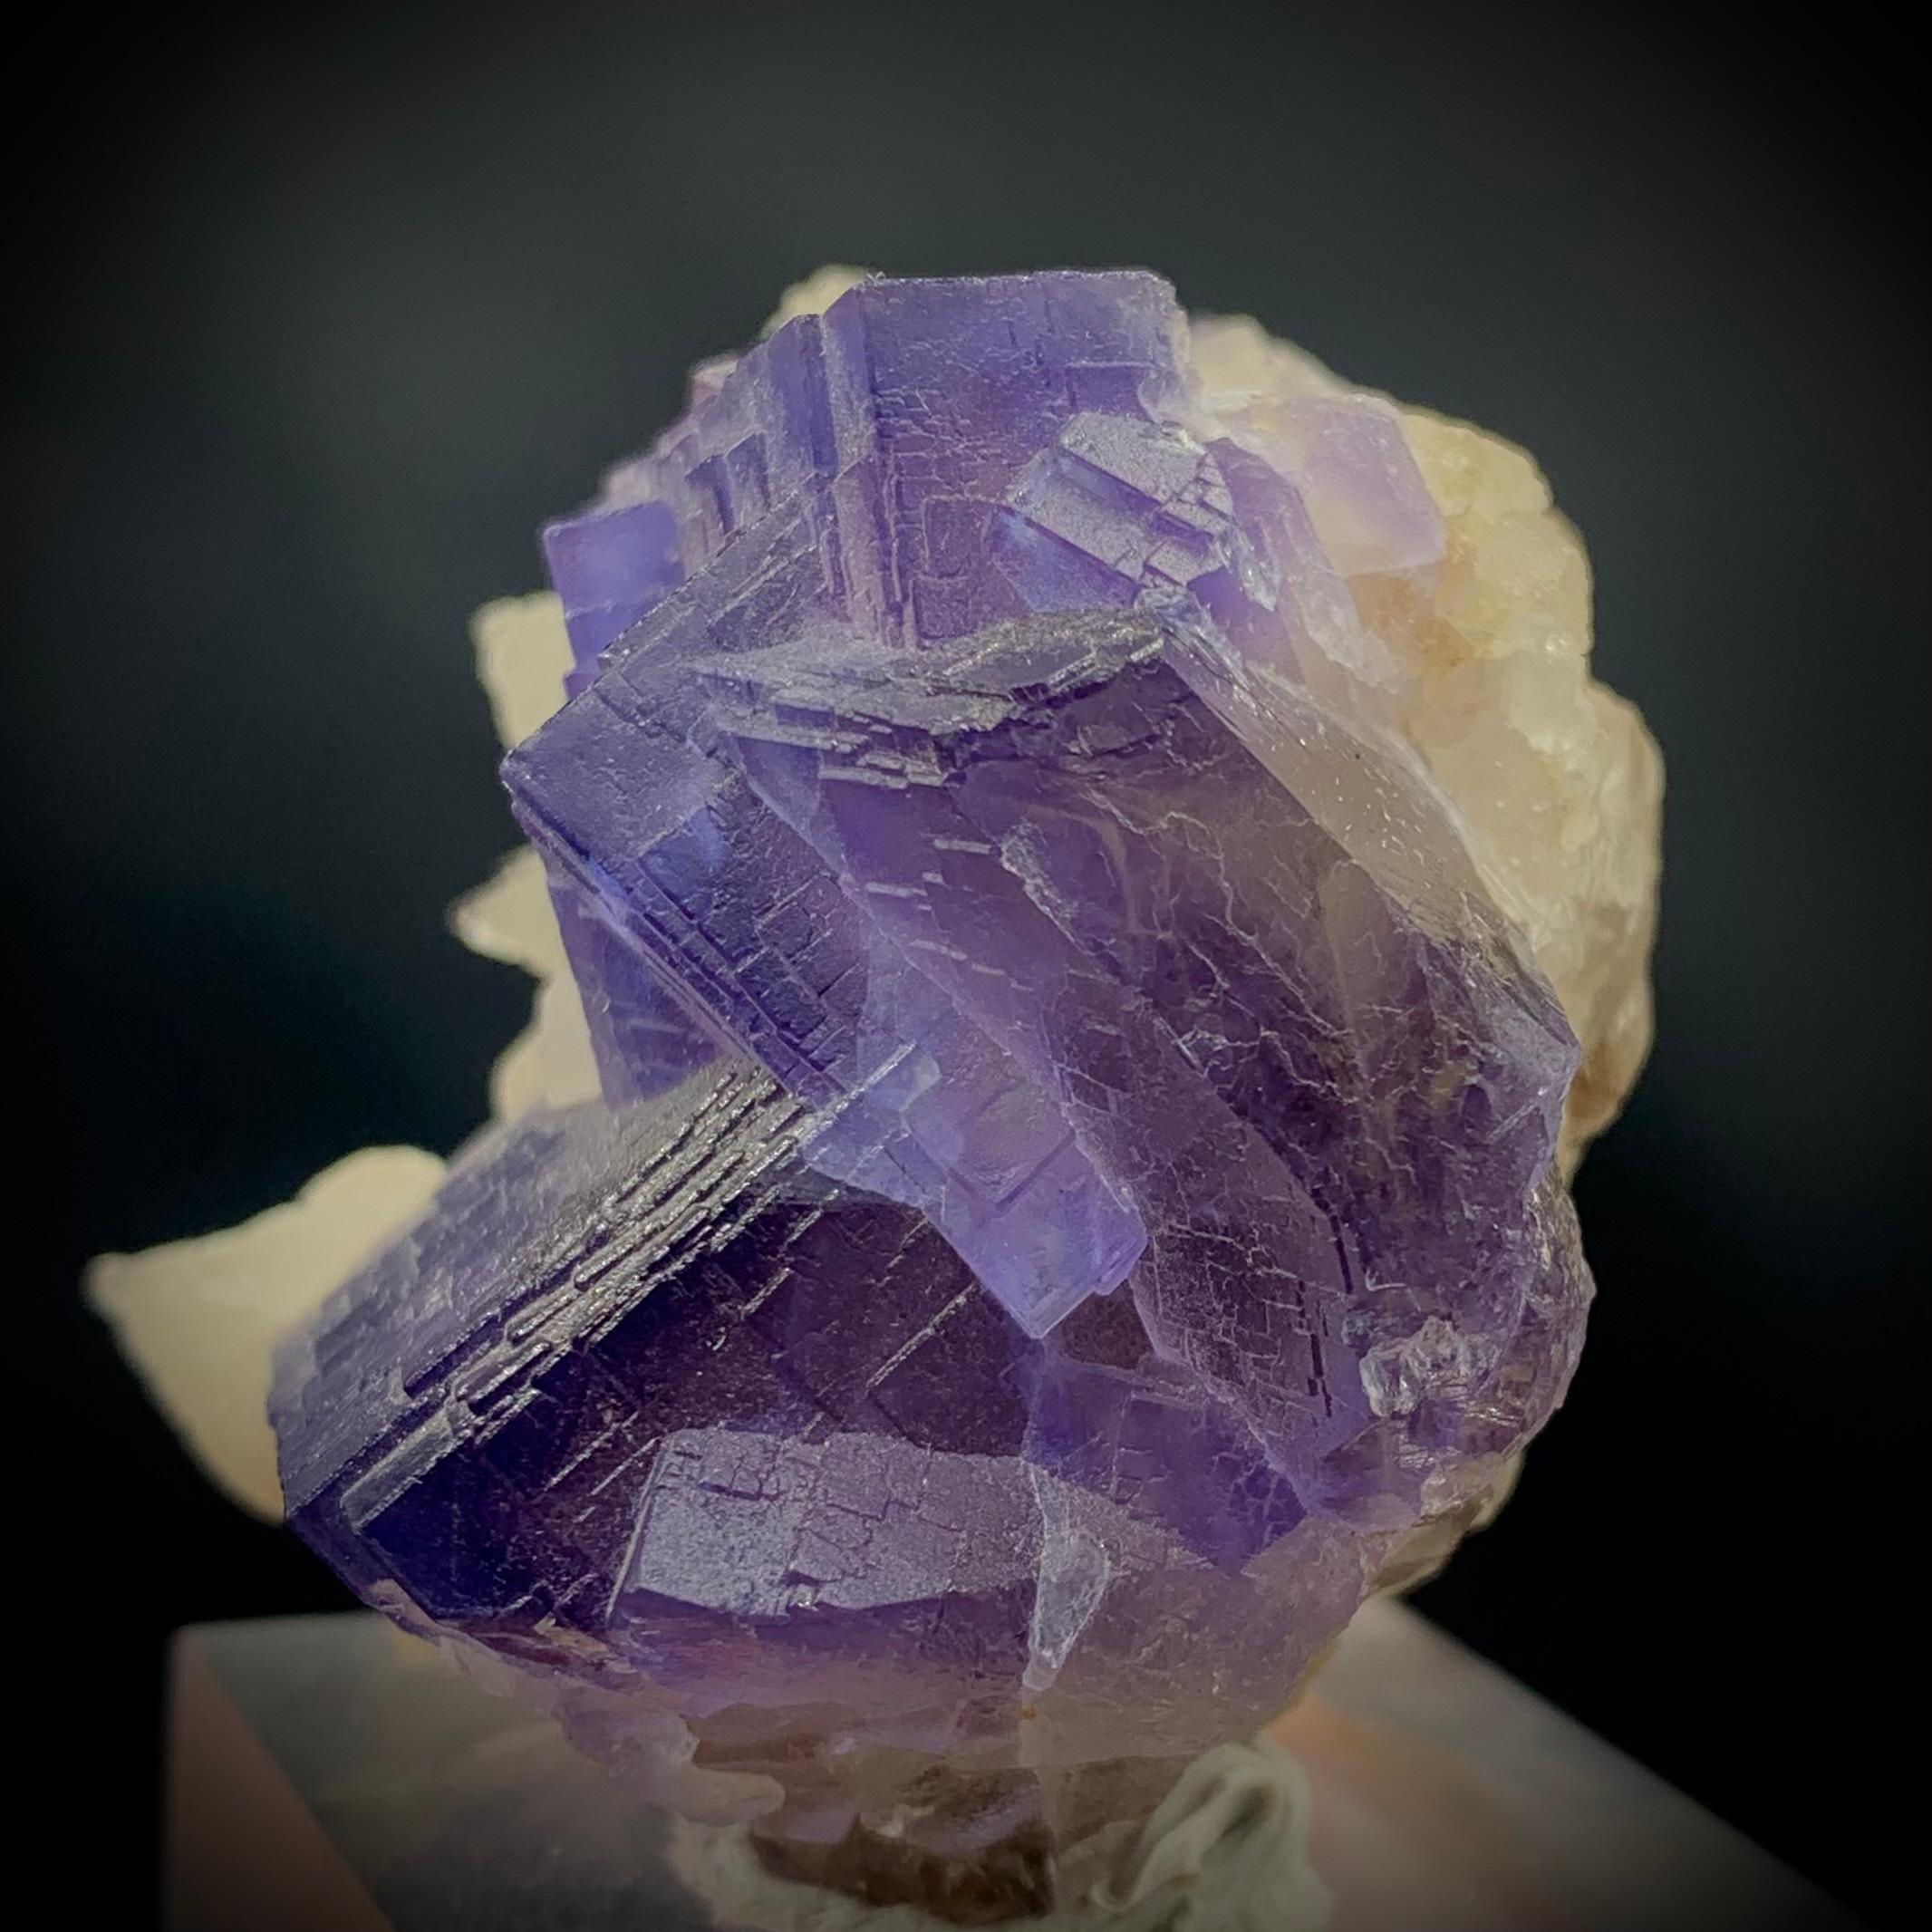 Crystal Glamorous Natural Purple Cubic Fluorite with Dog Tooth Calcite Specimen For Sale